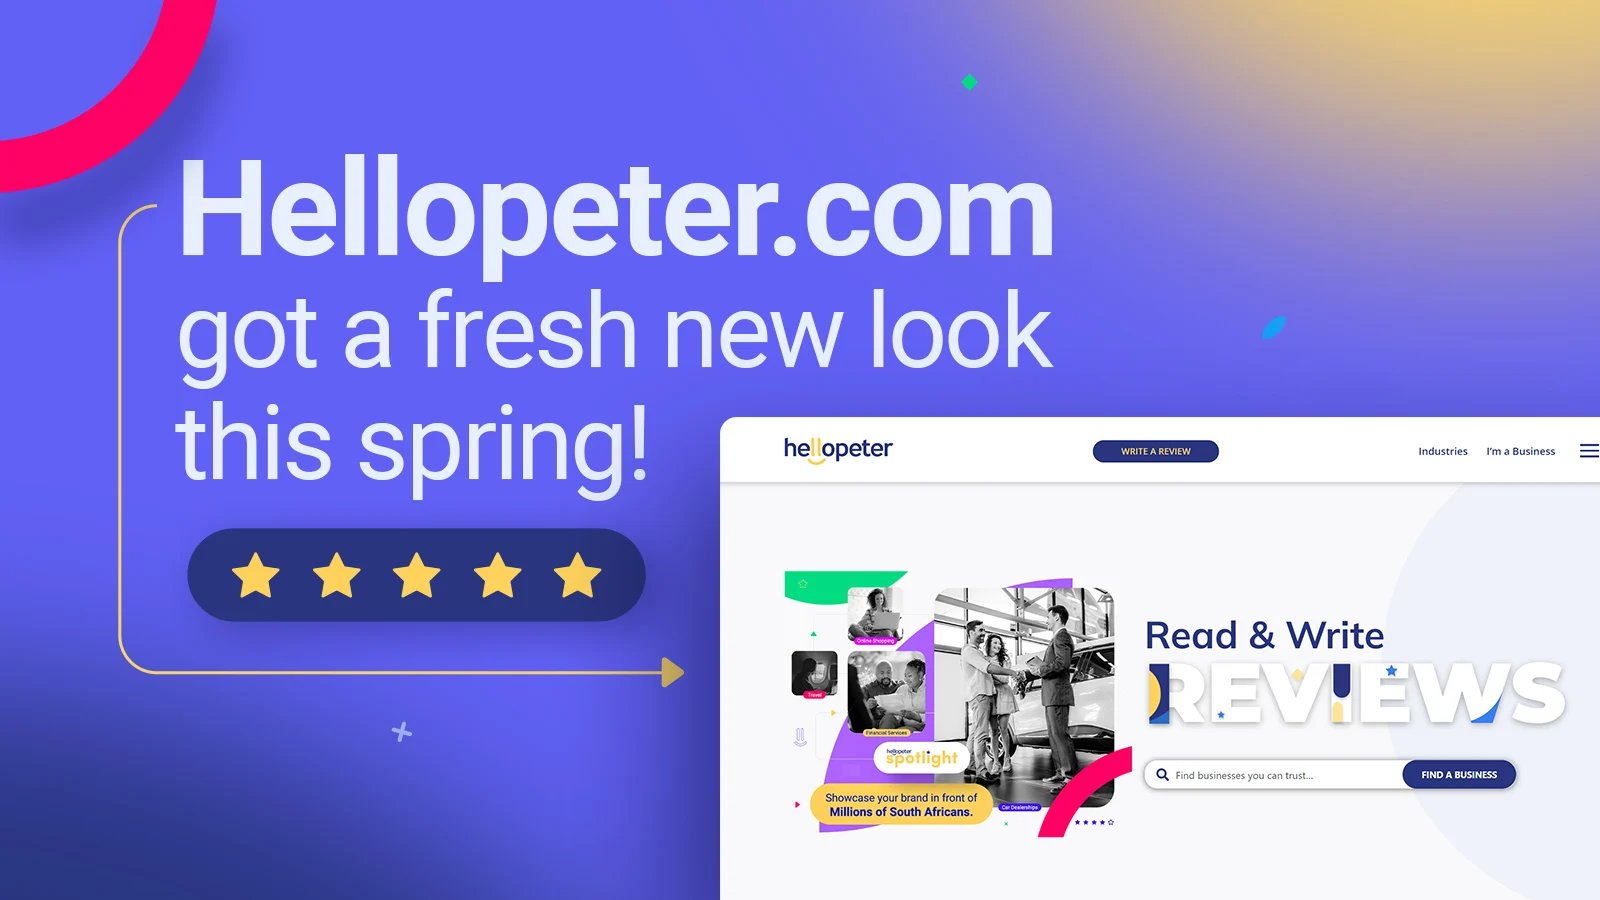 Blog-Hellopeter-got-a-fresh-new-look-this-spring